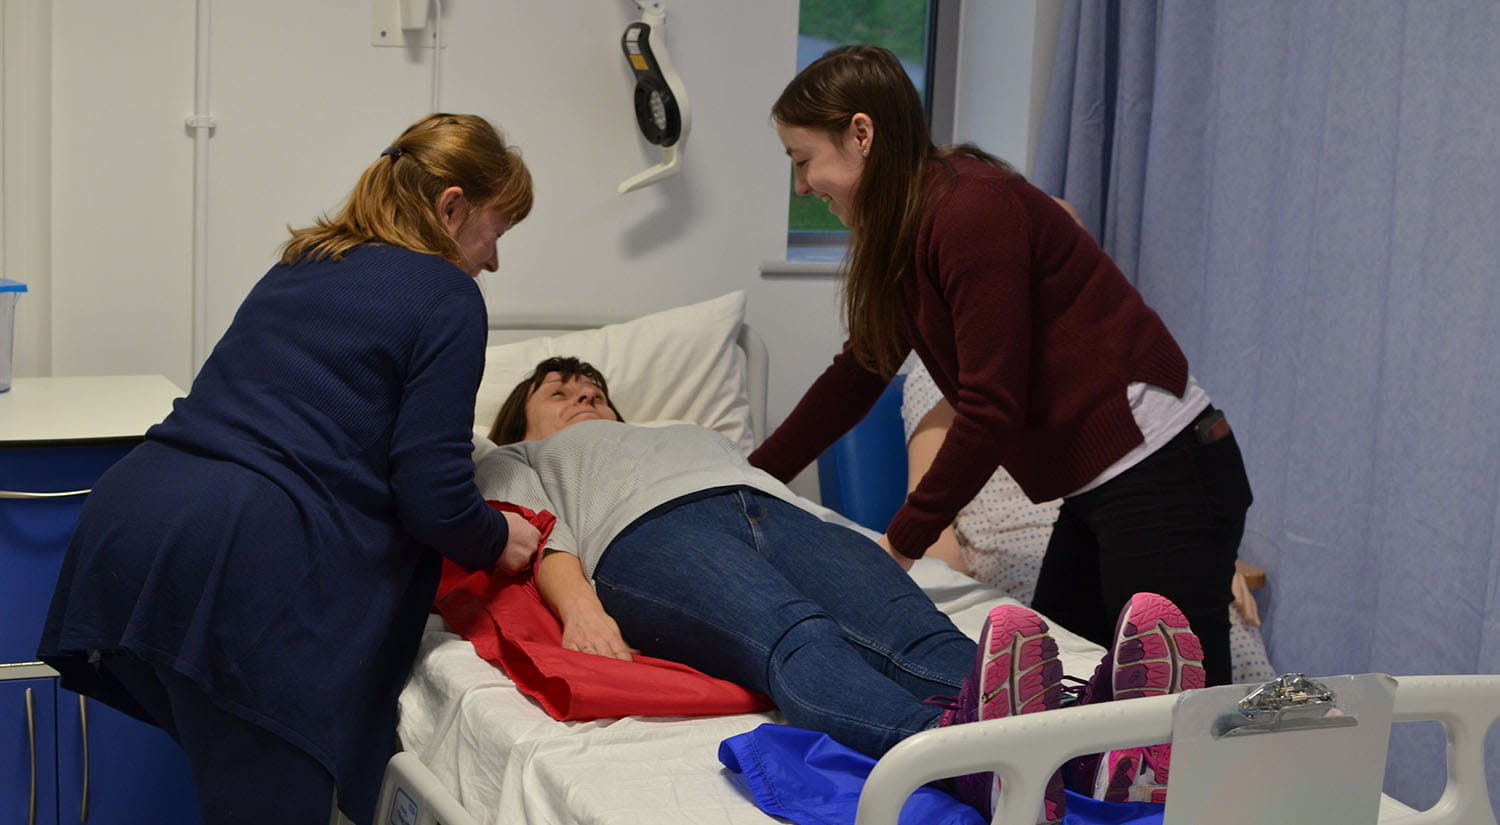 Occupational Therapy students practising using sliding sheets in our simulation ward